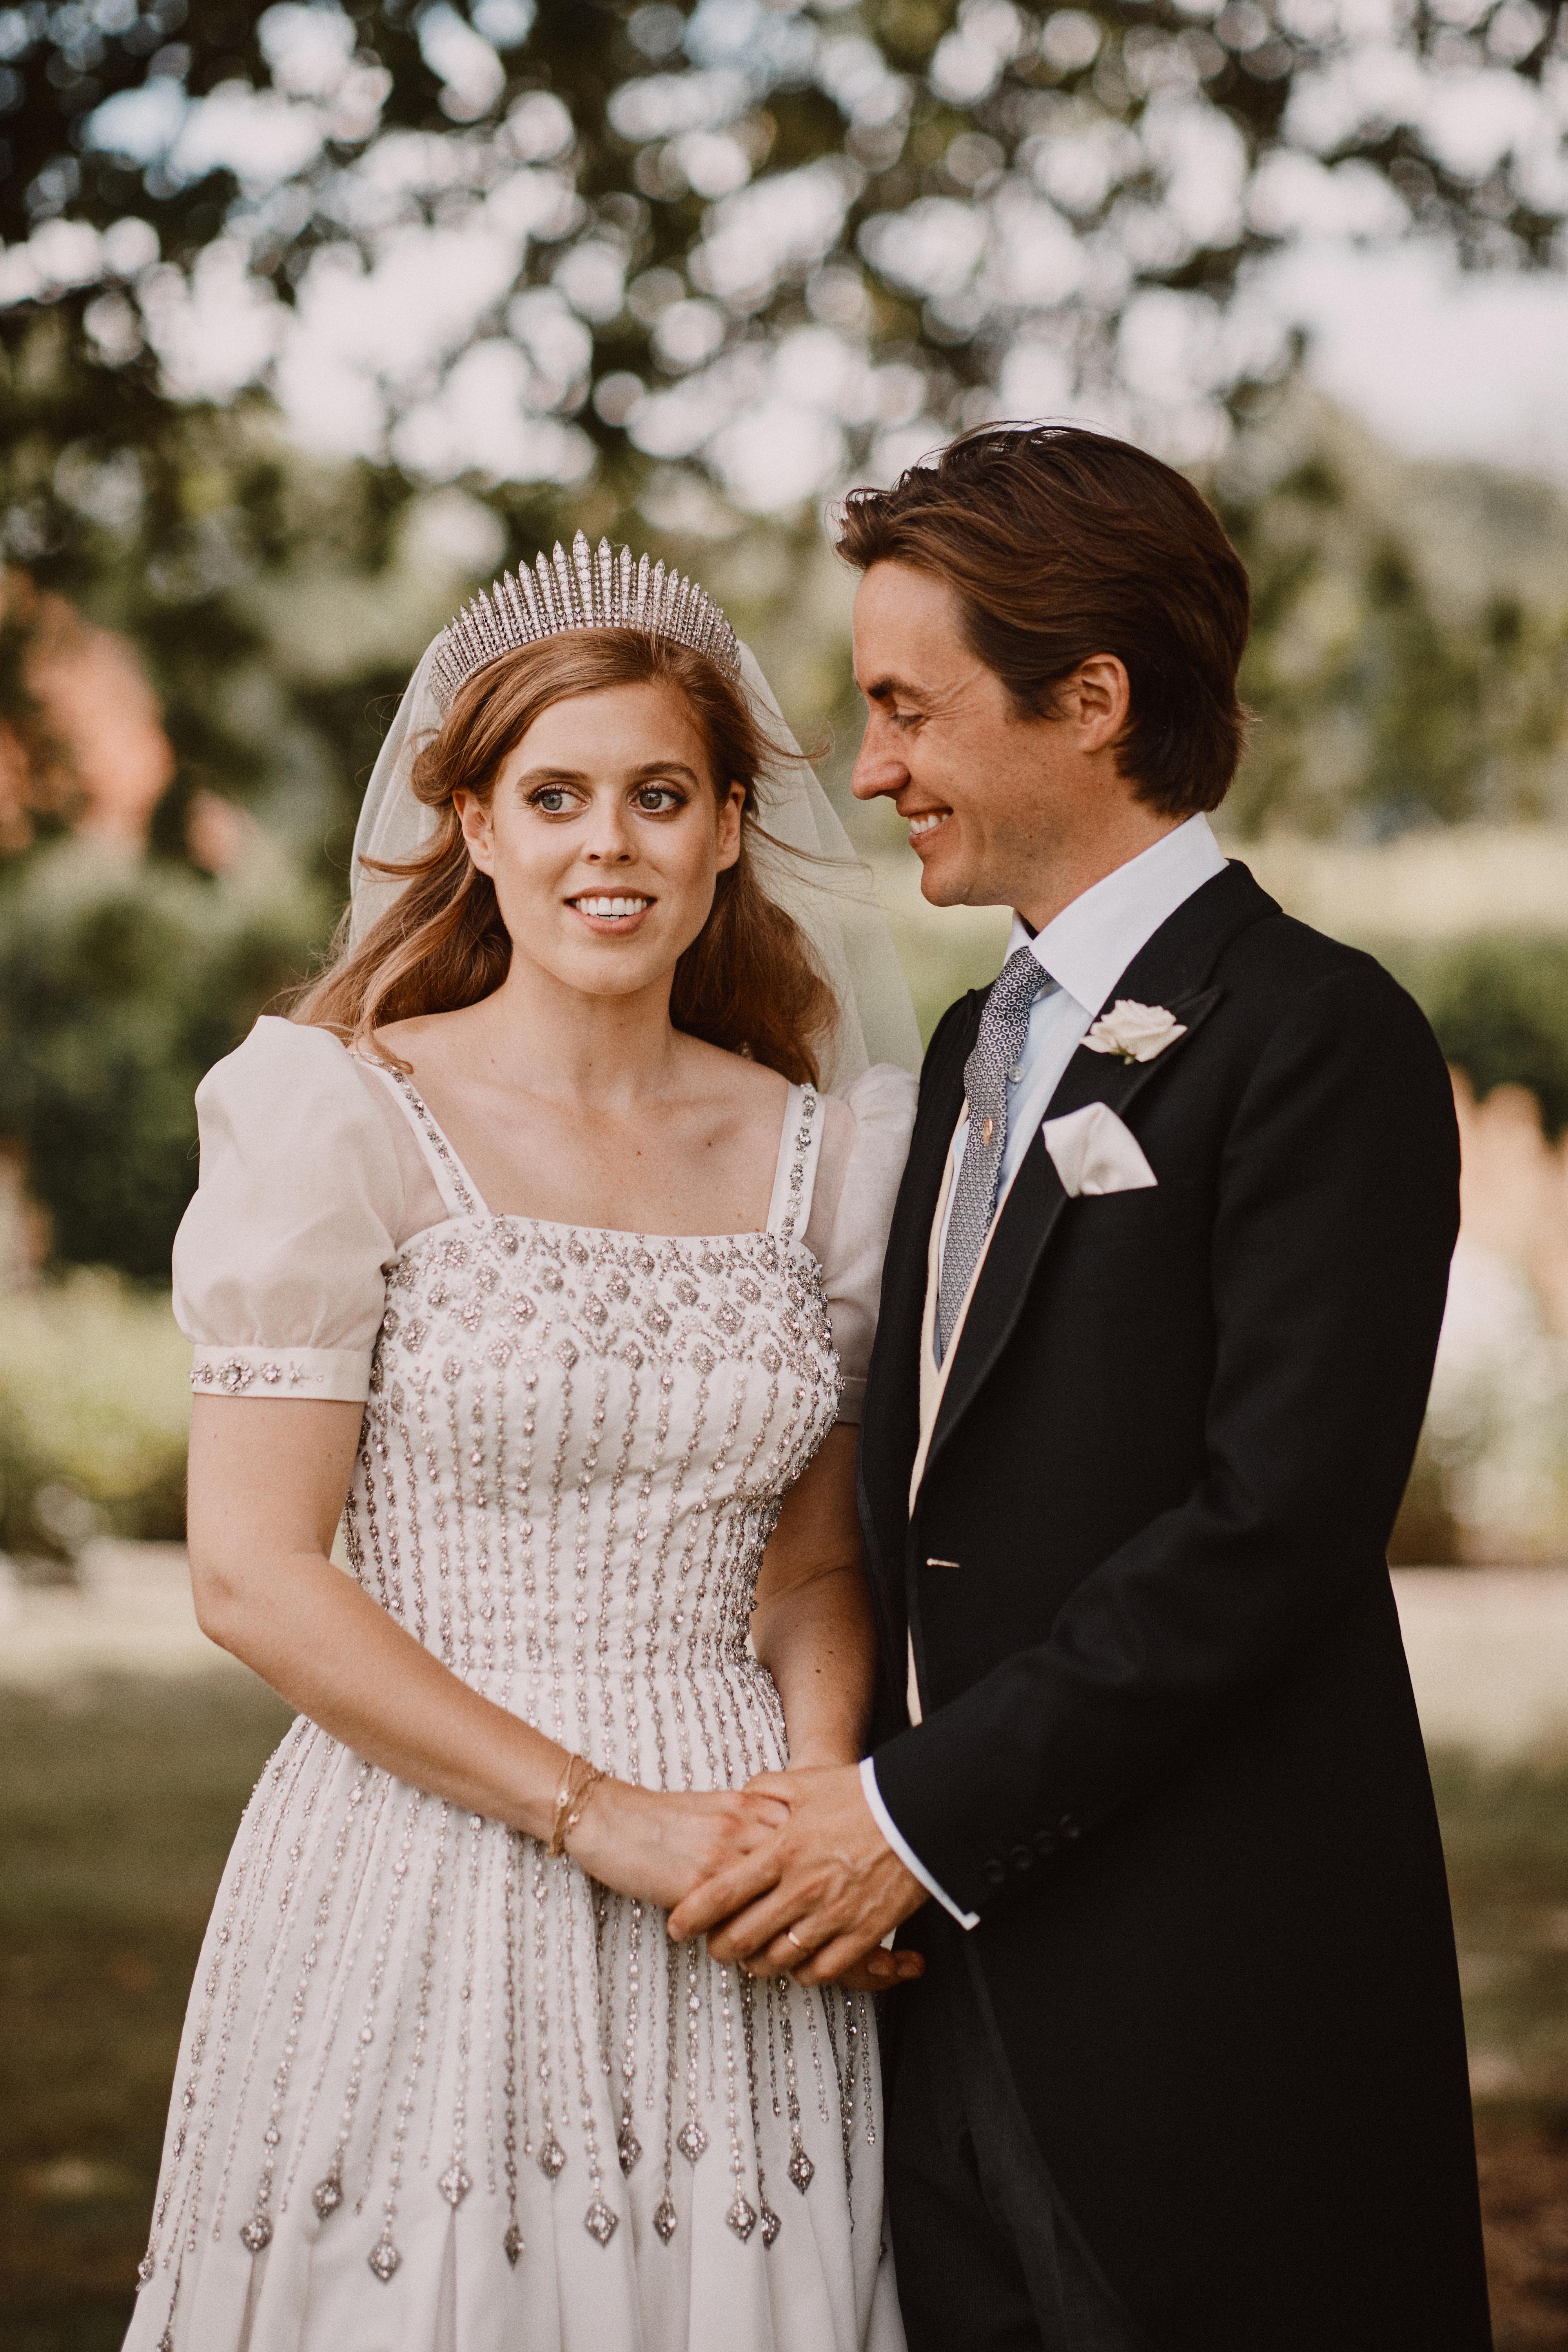 Princess Beatrice and Edoardo Mapelli Mozzi photographed after their wedding in the grounds of Royal Lodge on July 18, 2020 in Windsor, United Kingdom. / Source: Getty Images